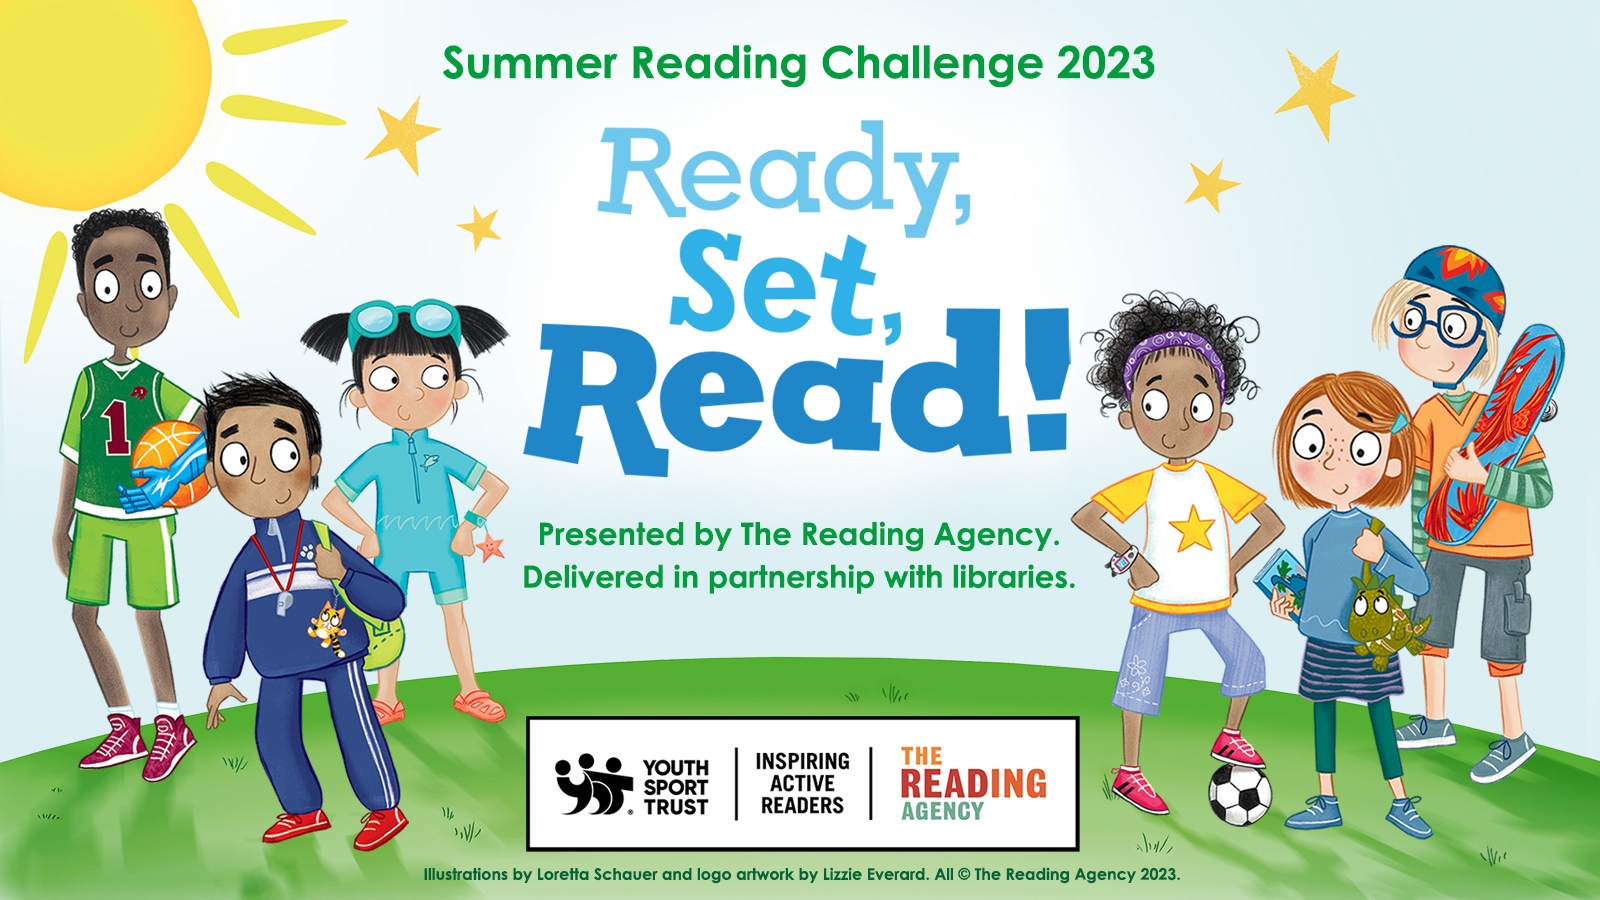 The Summer Reading Challenge 2023